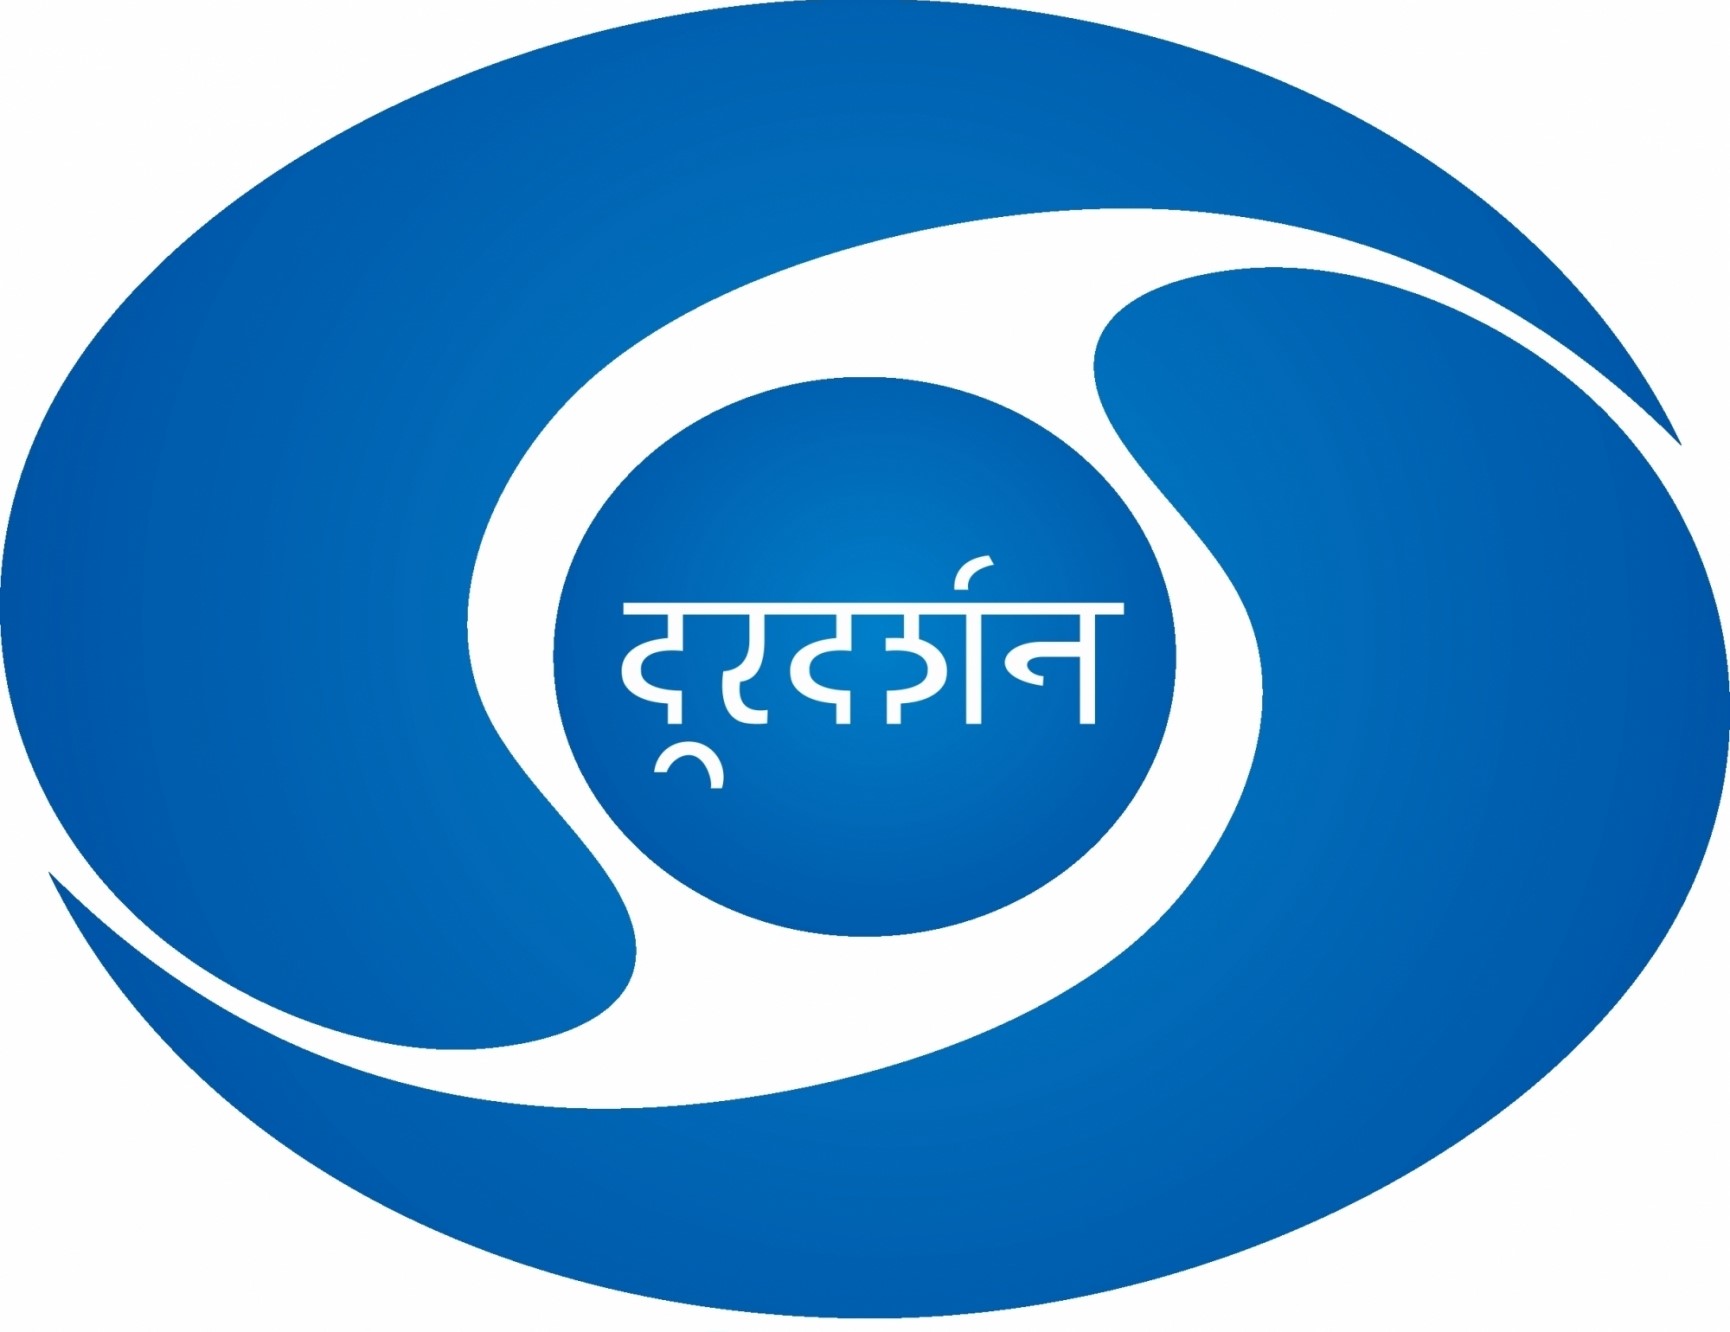 Doordarshan to share sign language bulletin with pvt TV news channels free of cost till Dec 31: Govt